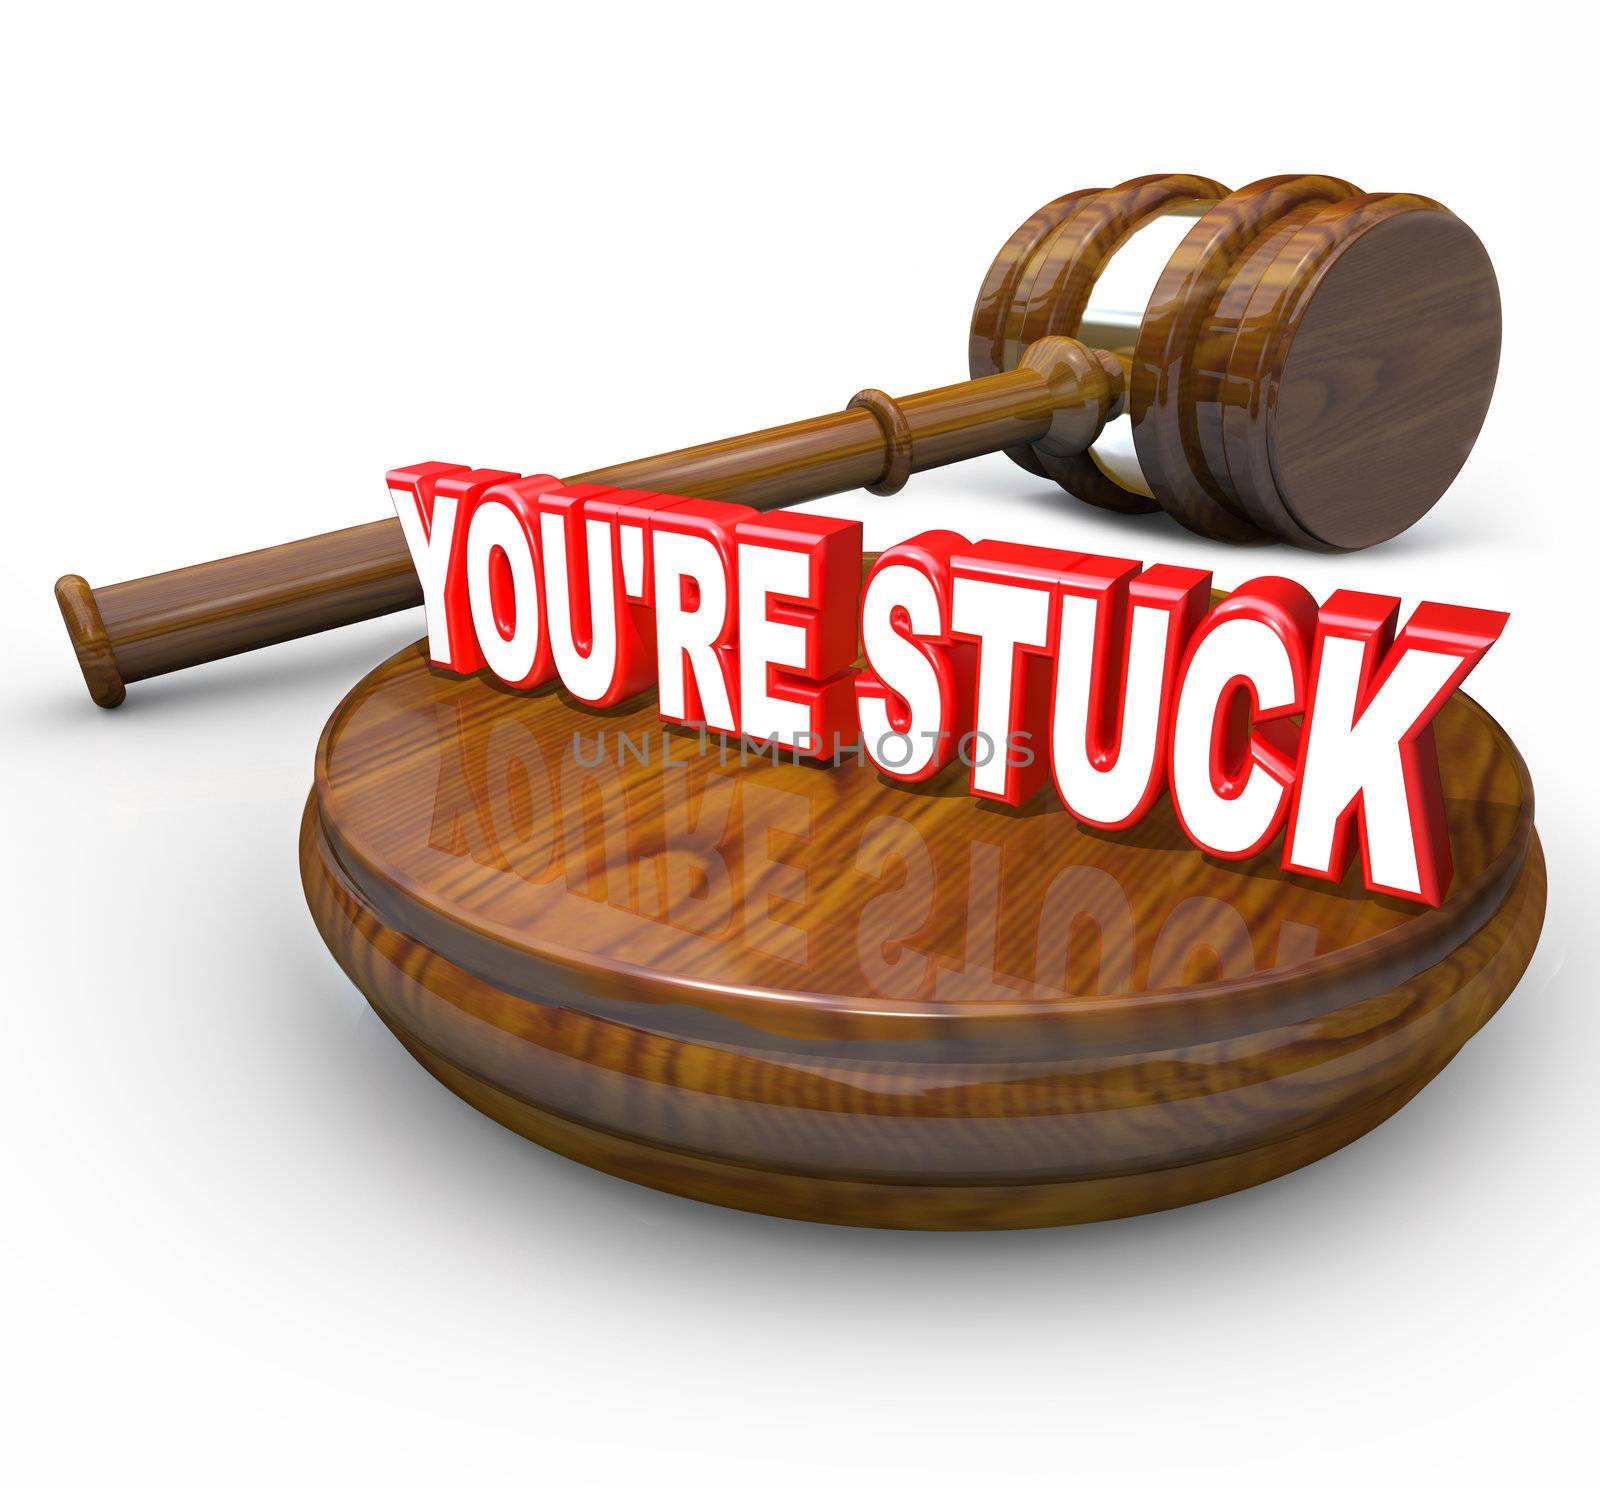 The words You're Stuck on a wooden block with a judge's gavel beside it illustrating that you are on the wrong side of the law or a legal case verdict and are in trouble